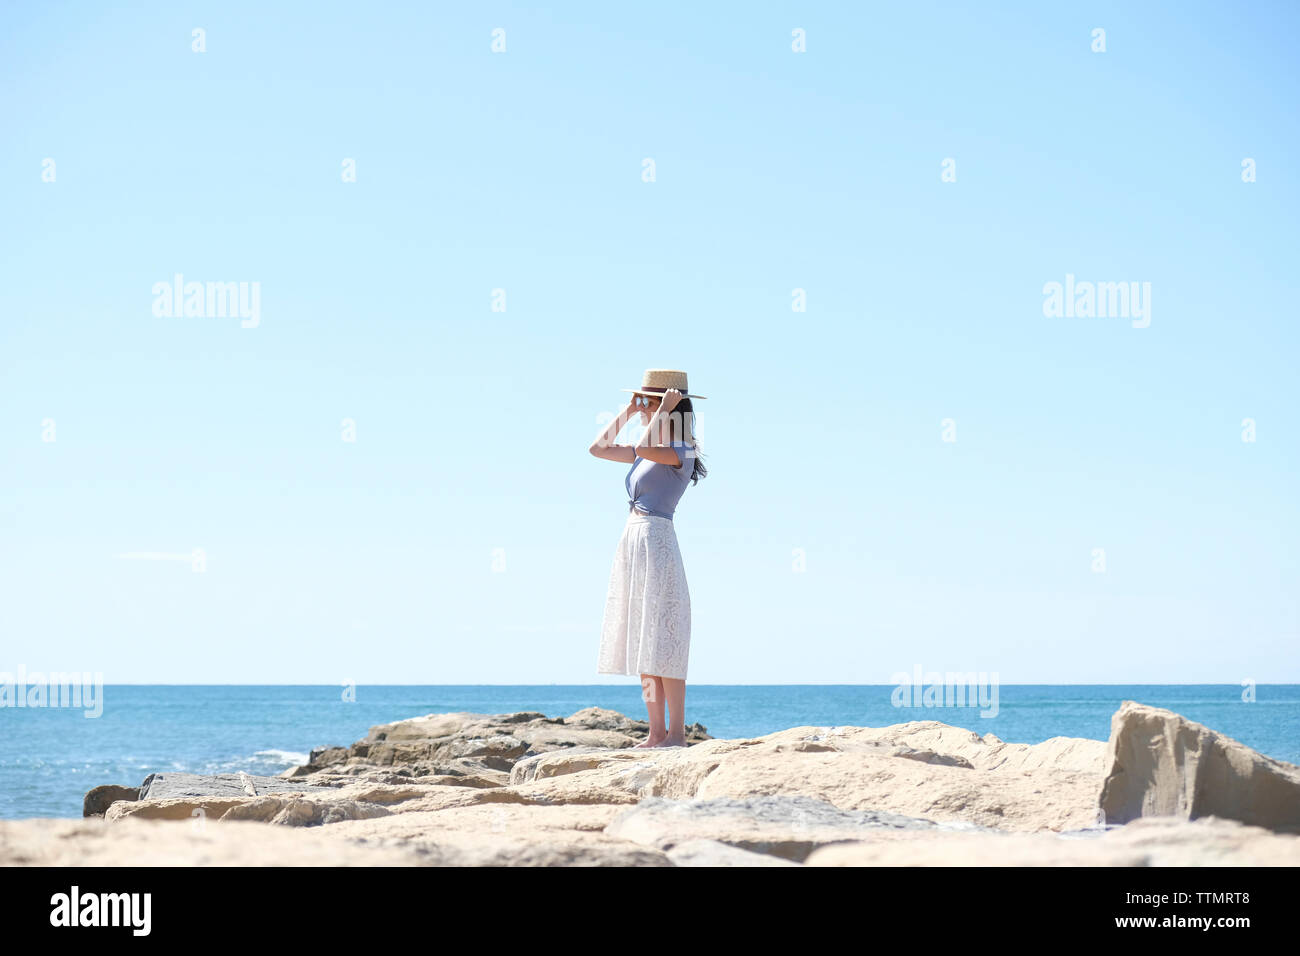 Young woman wearing hat while standing on rocks at beach against clear sky during sunny day Stock Photo